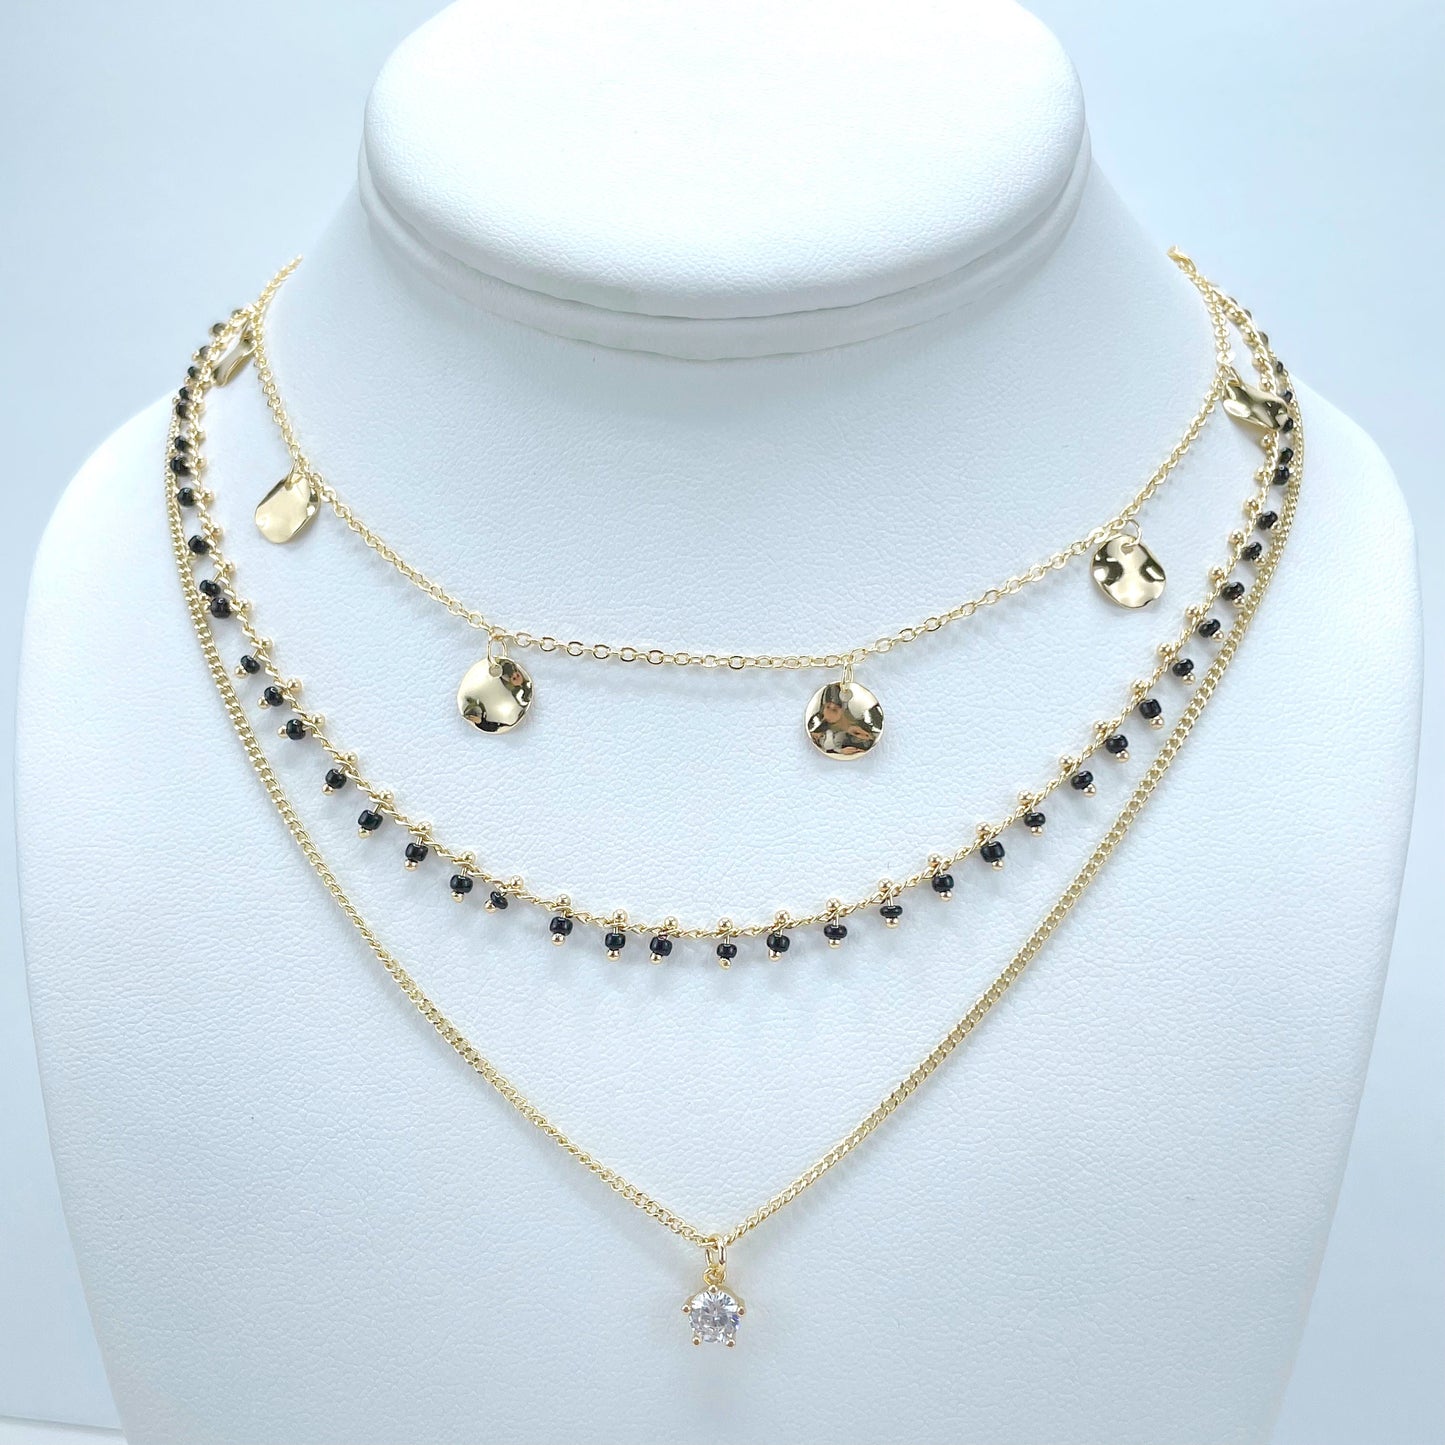 18k Gold Filled Set with 03 Necklaces, Round Gold Charms Neck, Paperclip Solitaire CZ and Black Beaded Necklace, Wholesale Jewelry Supplies